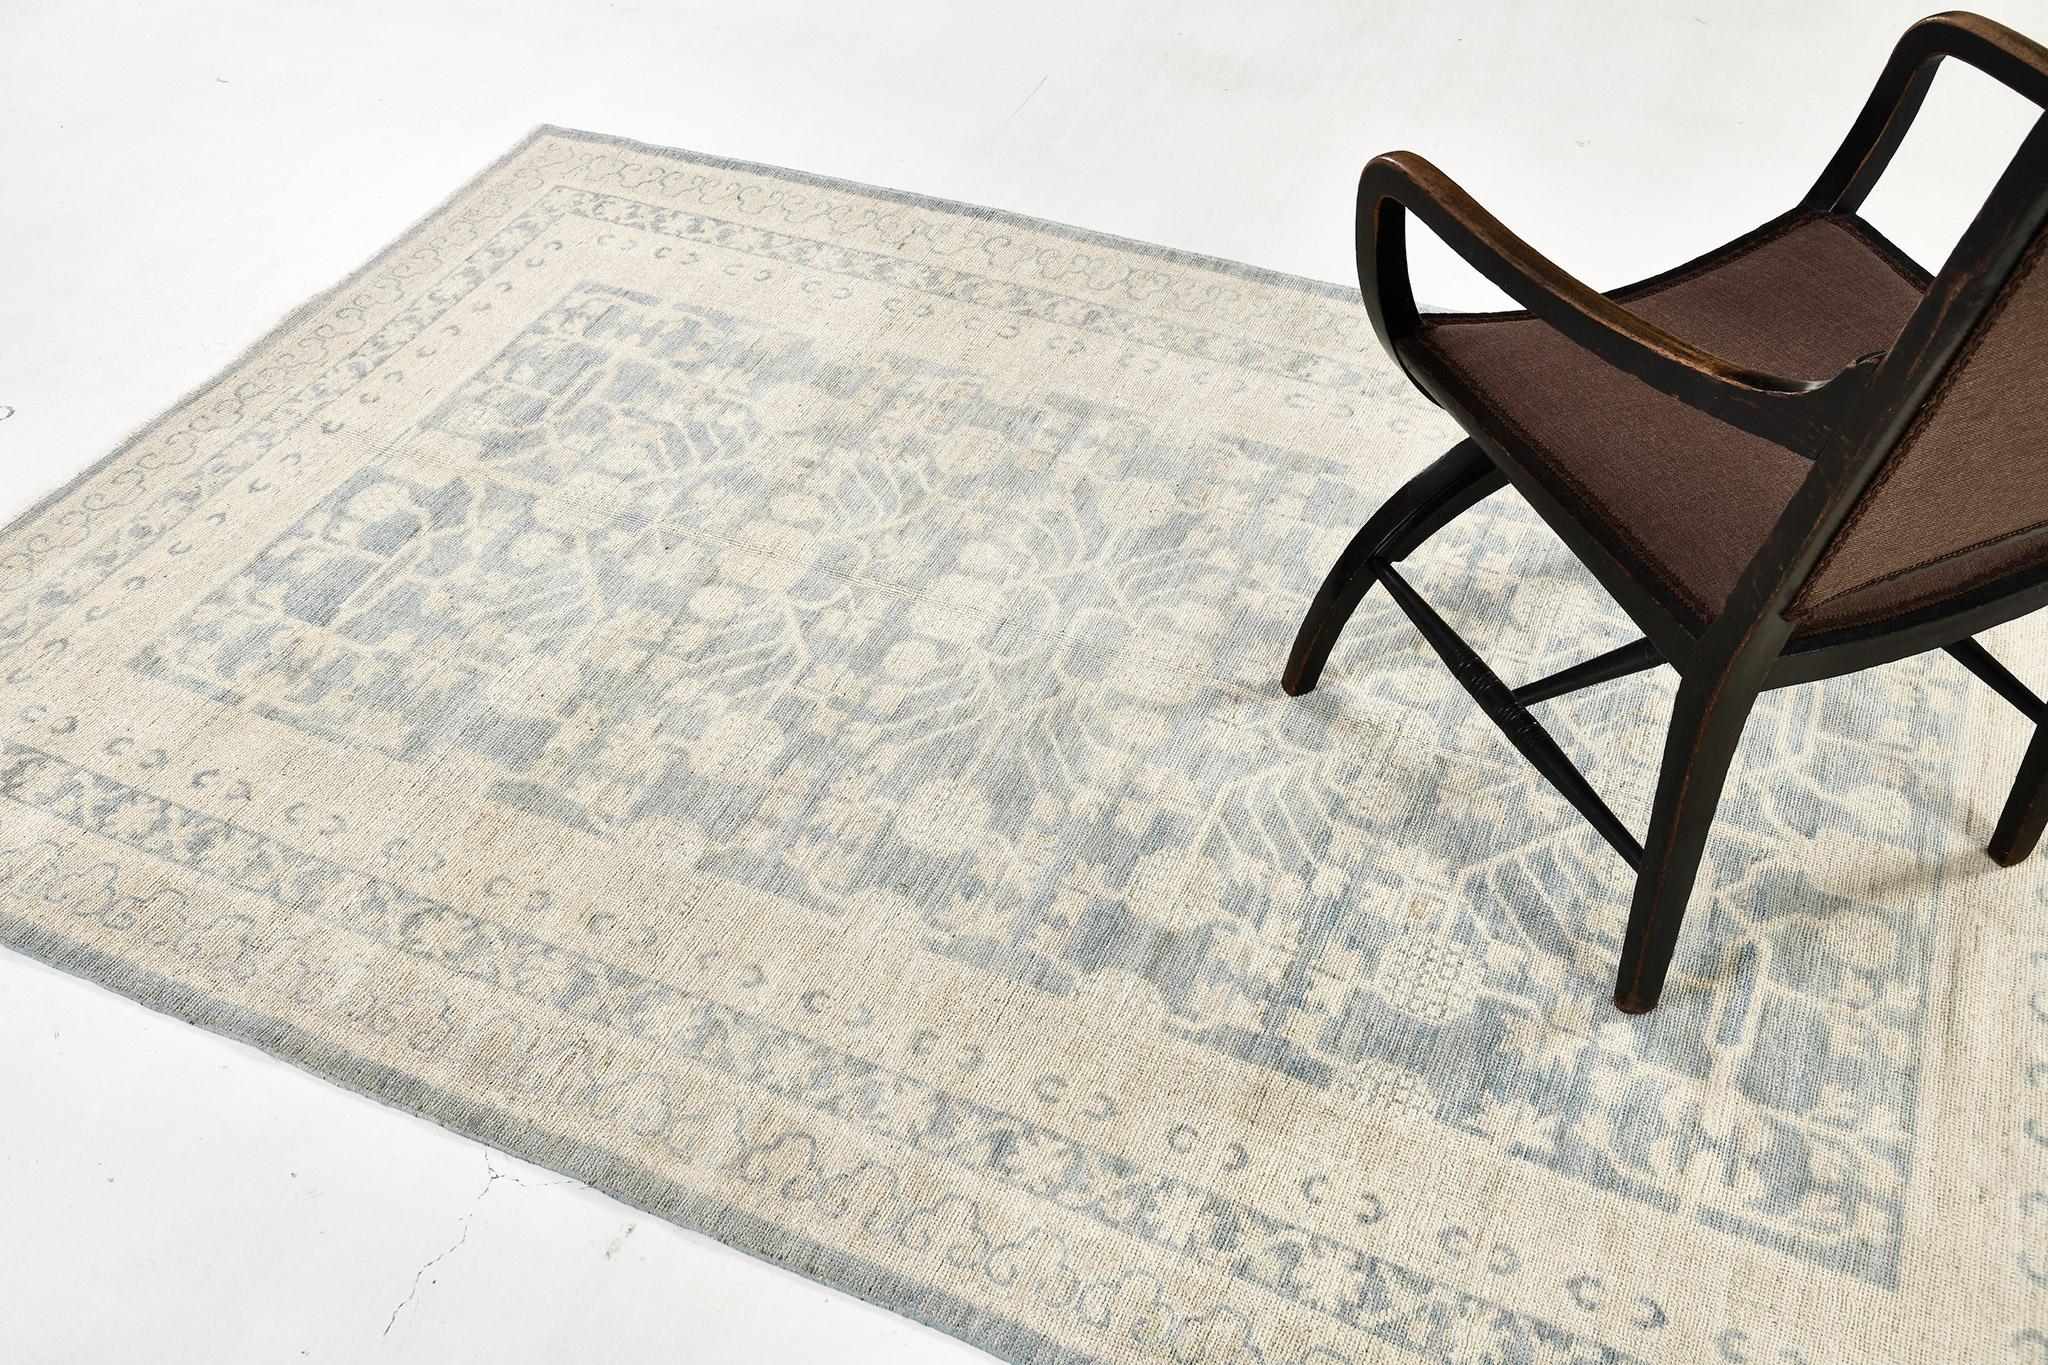 A gorgeous Khotan revival piece that showcases a symmetrical pomegranate pattern connected by a network of florid elements enclosed by Ram’s horn border. This magnificent rug exudes cozy and casual elegance with an idyllic coastal vibe featuring the